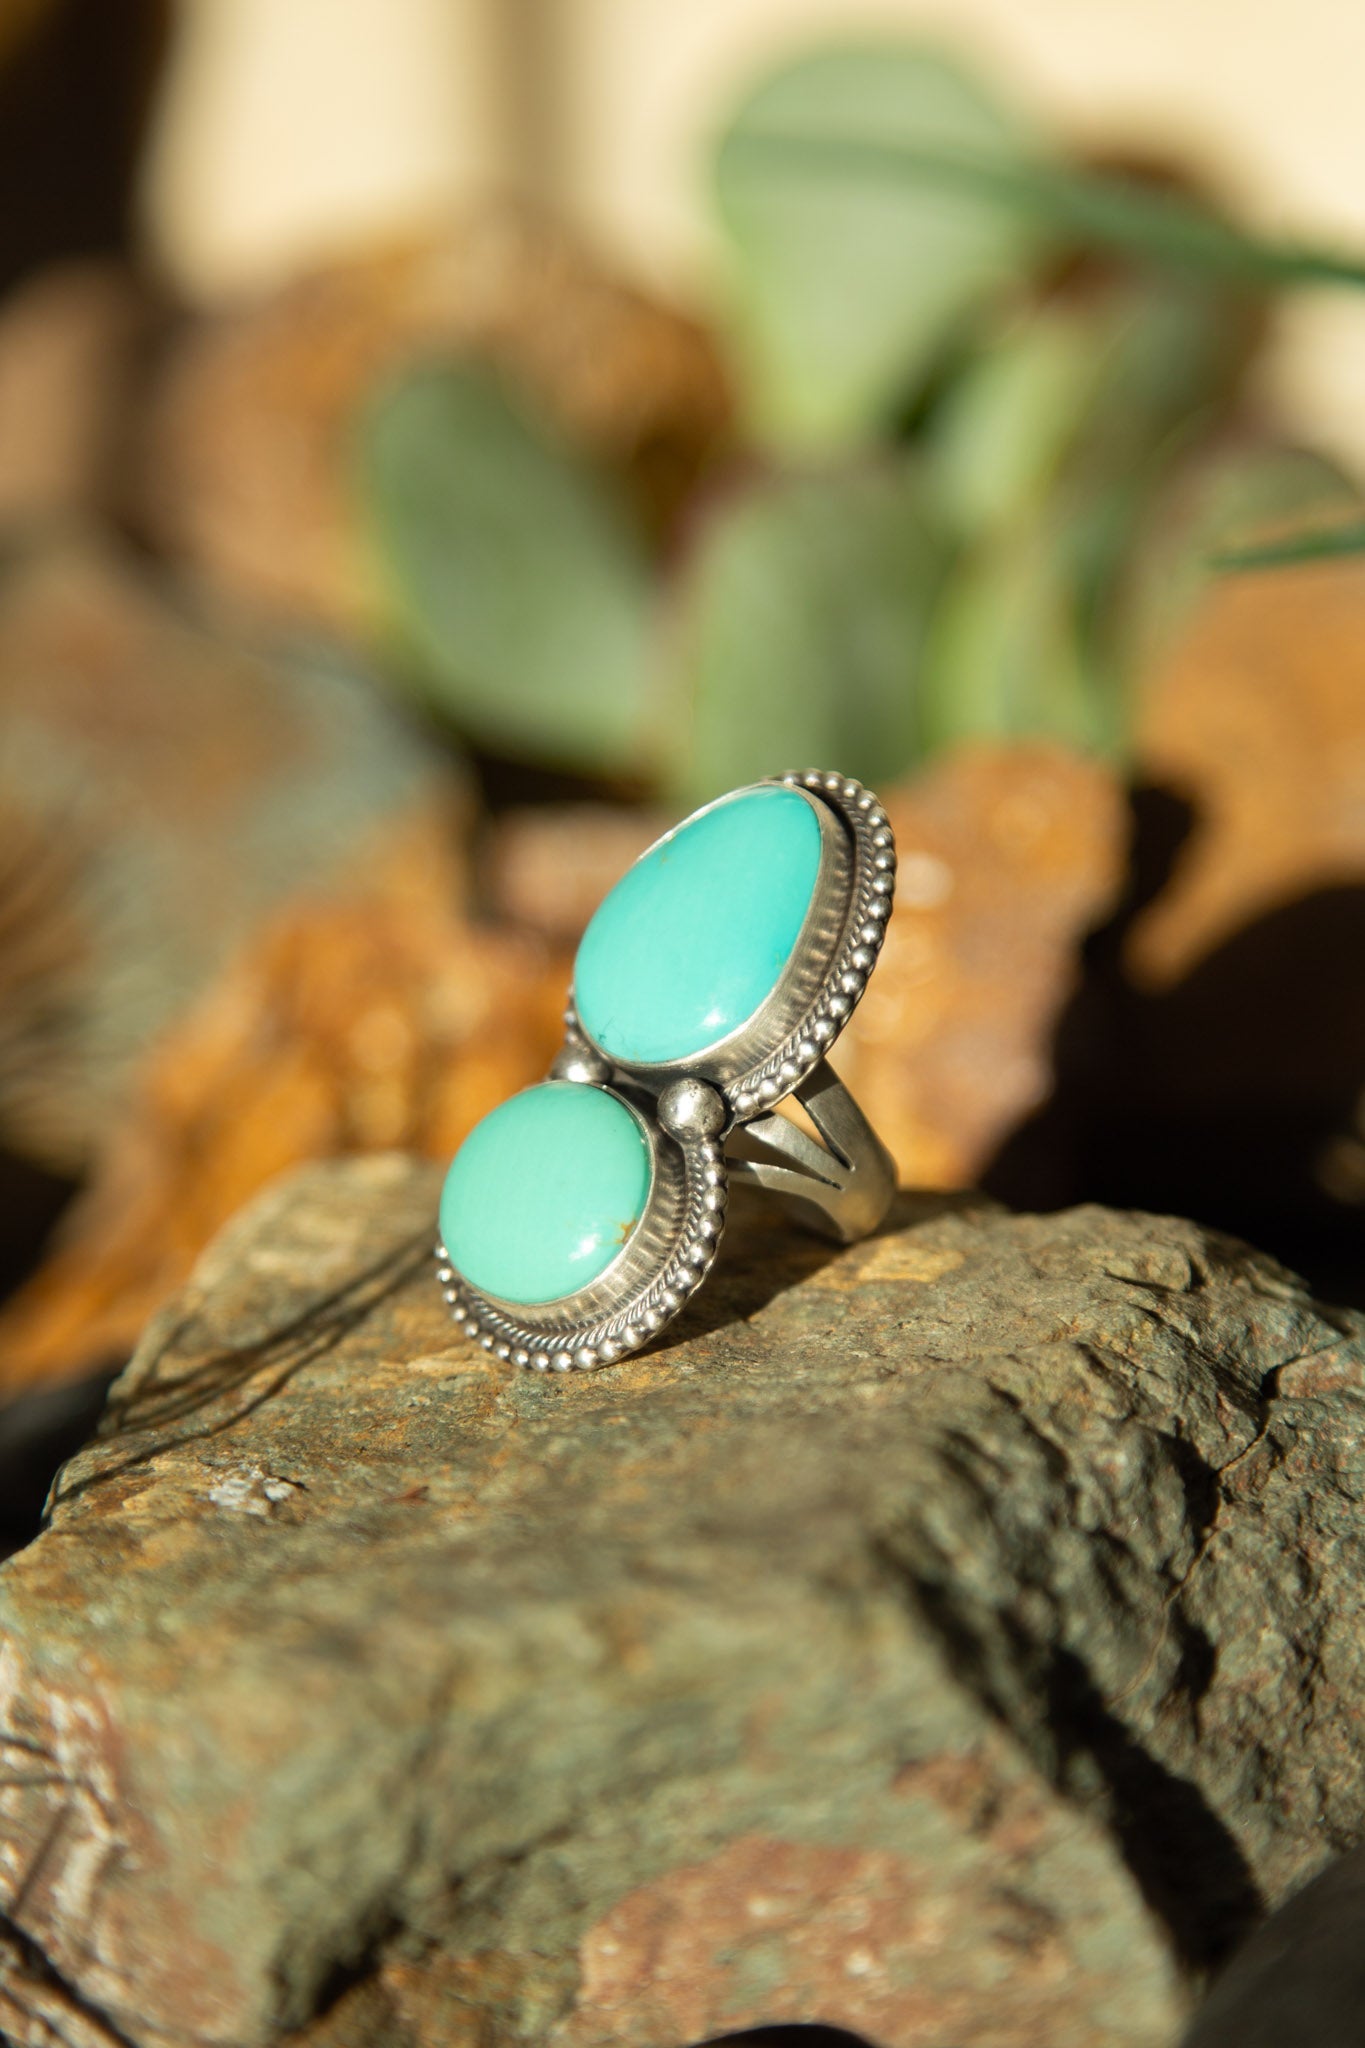 Turquoise Stone Silver Mens Ring with Ornaments » Anitolia